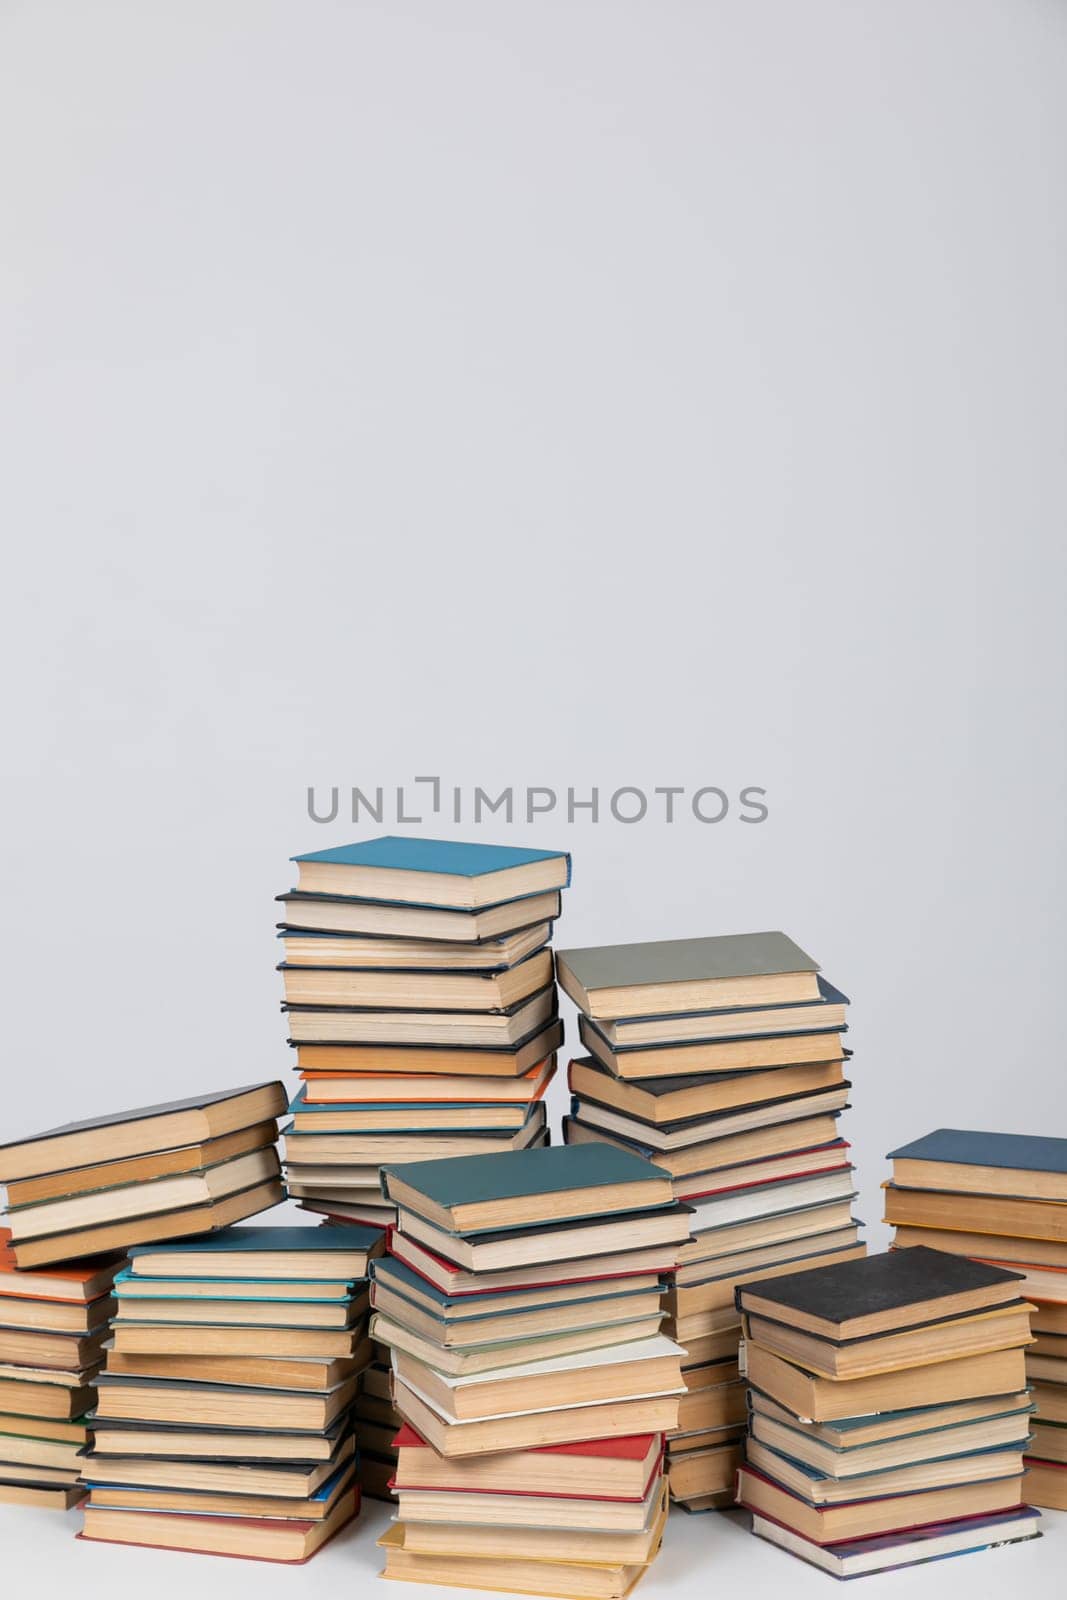 science education stack of books on white background teaching literacy by Simakov